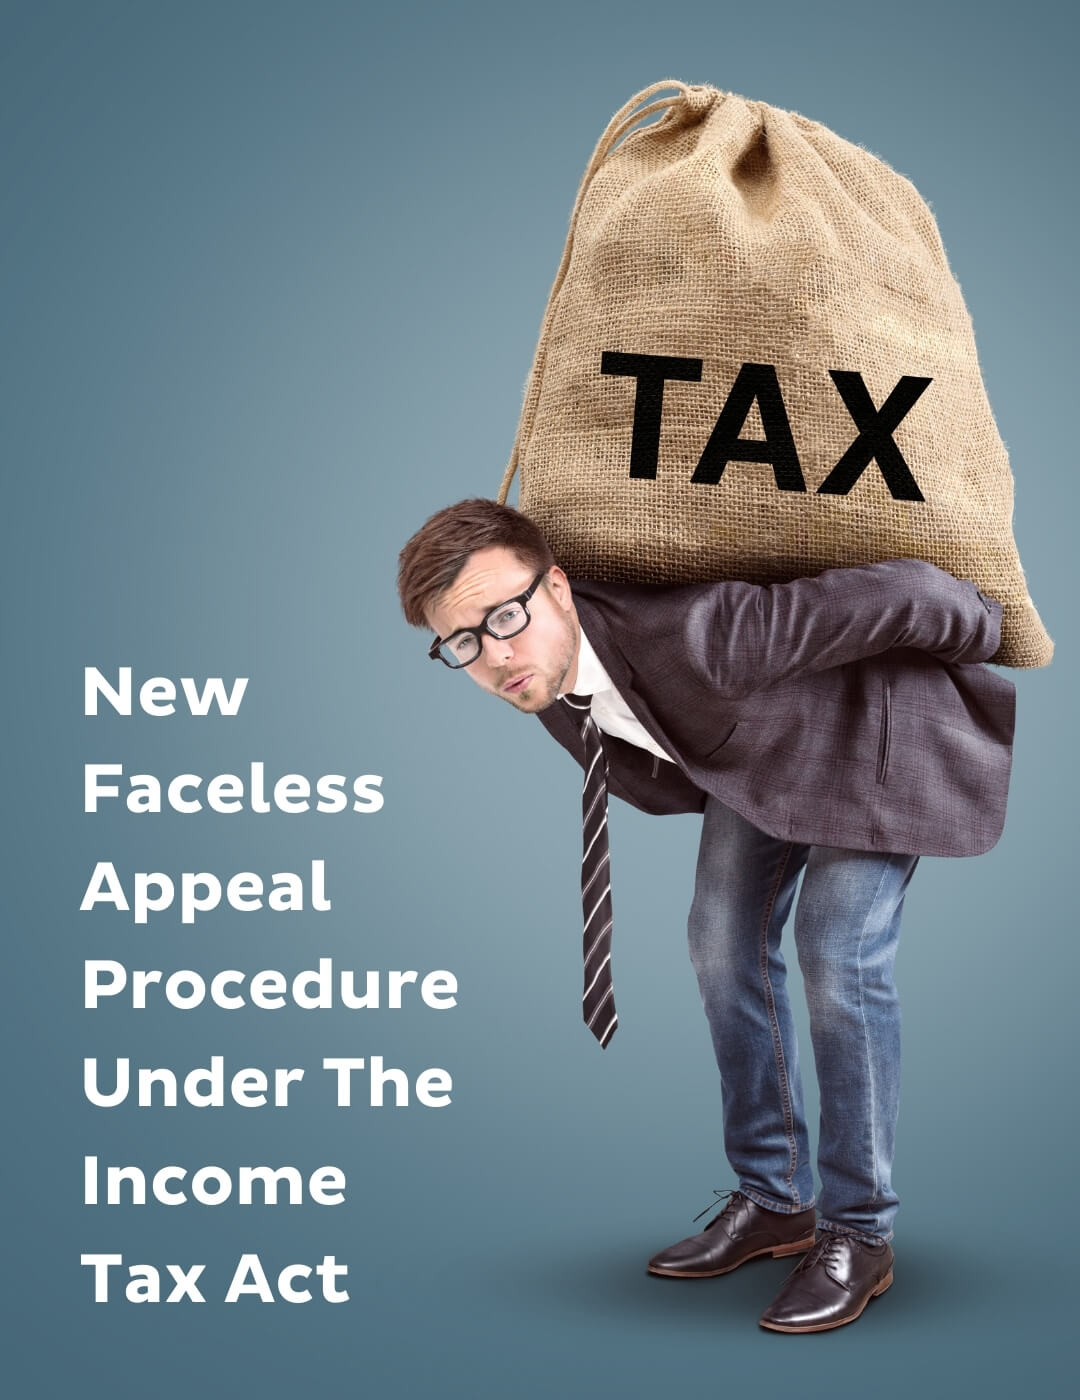 New Faceless Appeal Procedure Under The Income Tax Act